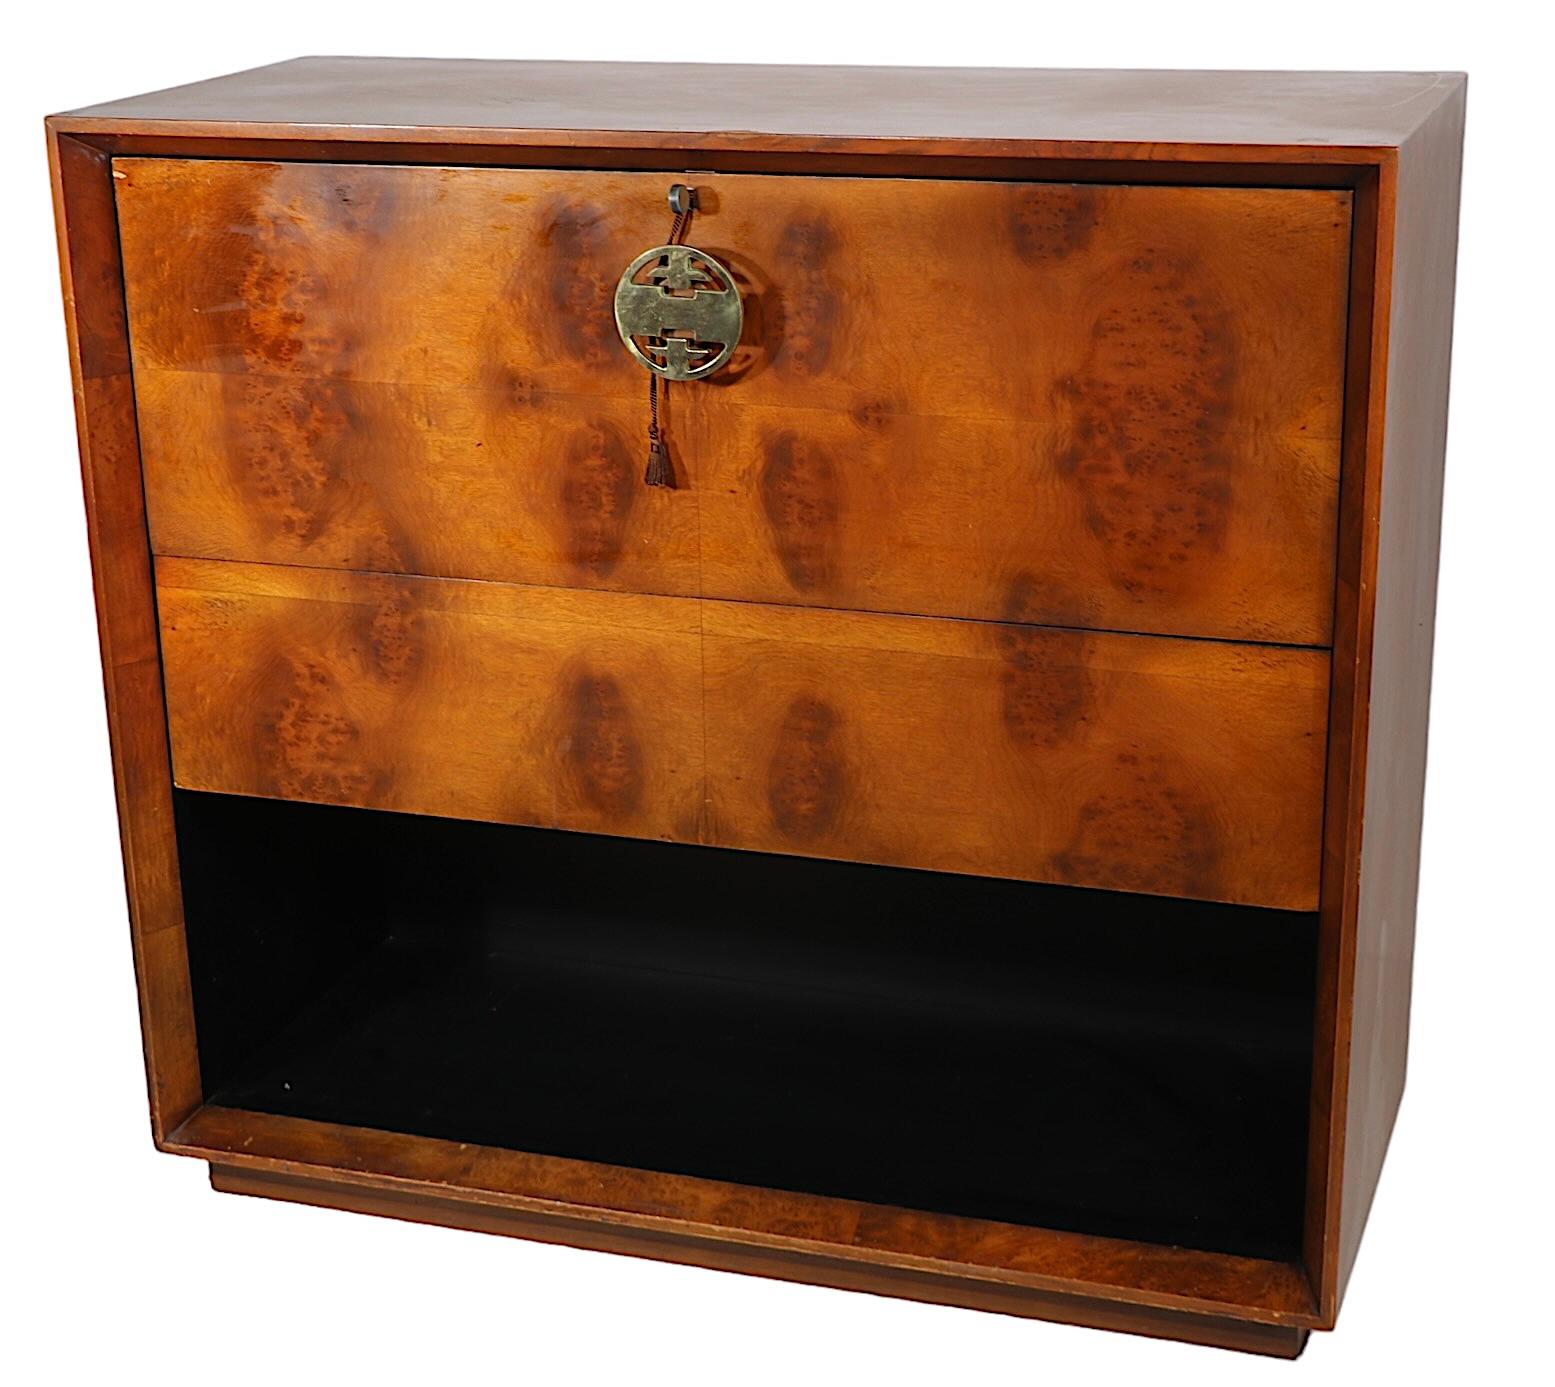 Elegant and sophisticated drop front desk designed by Gilbert Rohde for Herman Miller as part of the much sought after Palladio series, circa 1940’s.
The desk features a burl veneer fall front, over burl front drawer, over an open storage space with